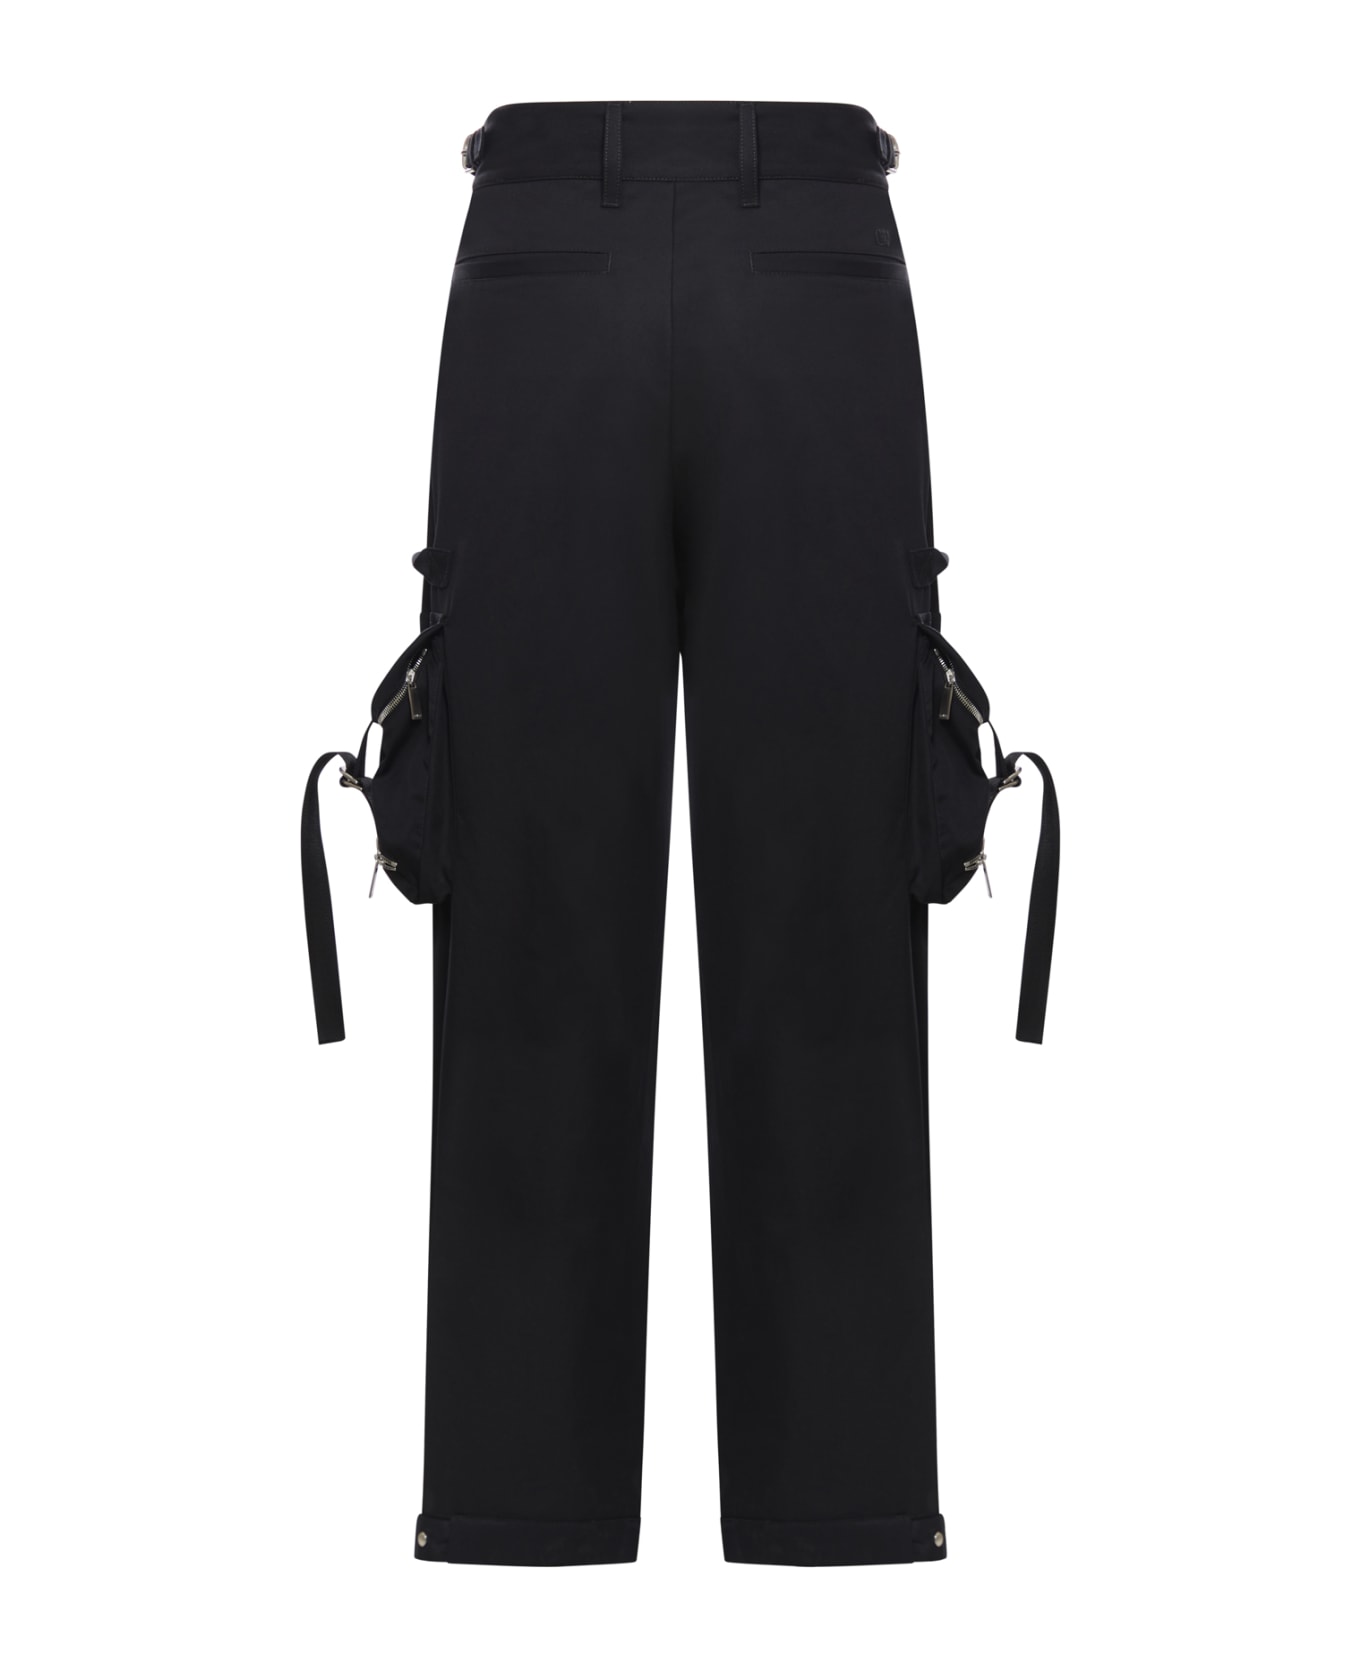 Off-White Trousers With Pockets - Black ボトムス